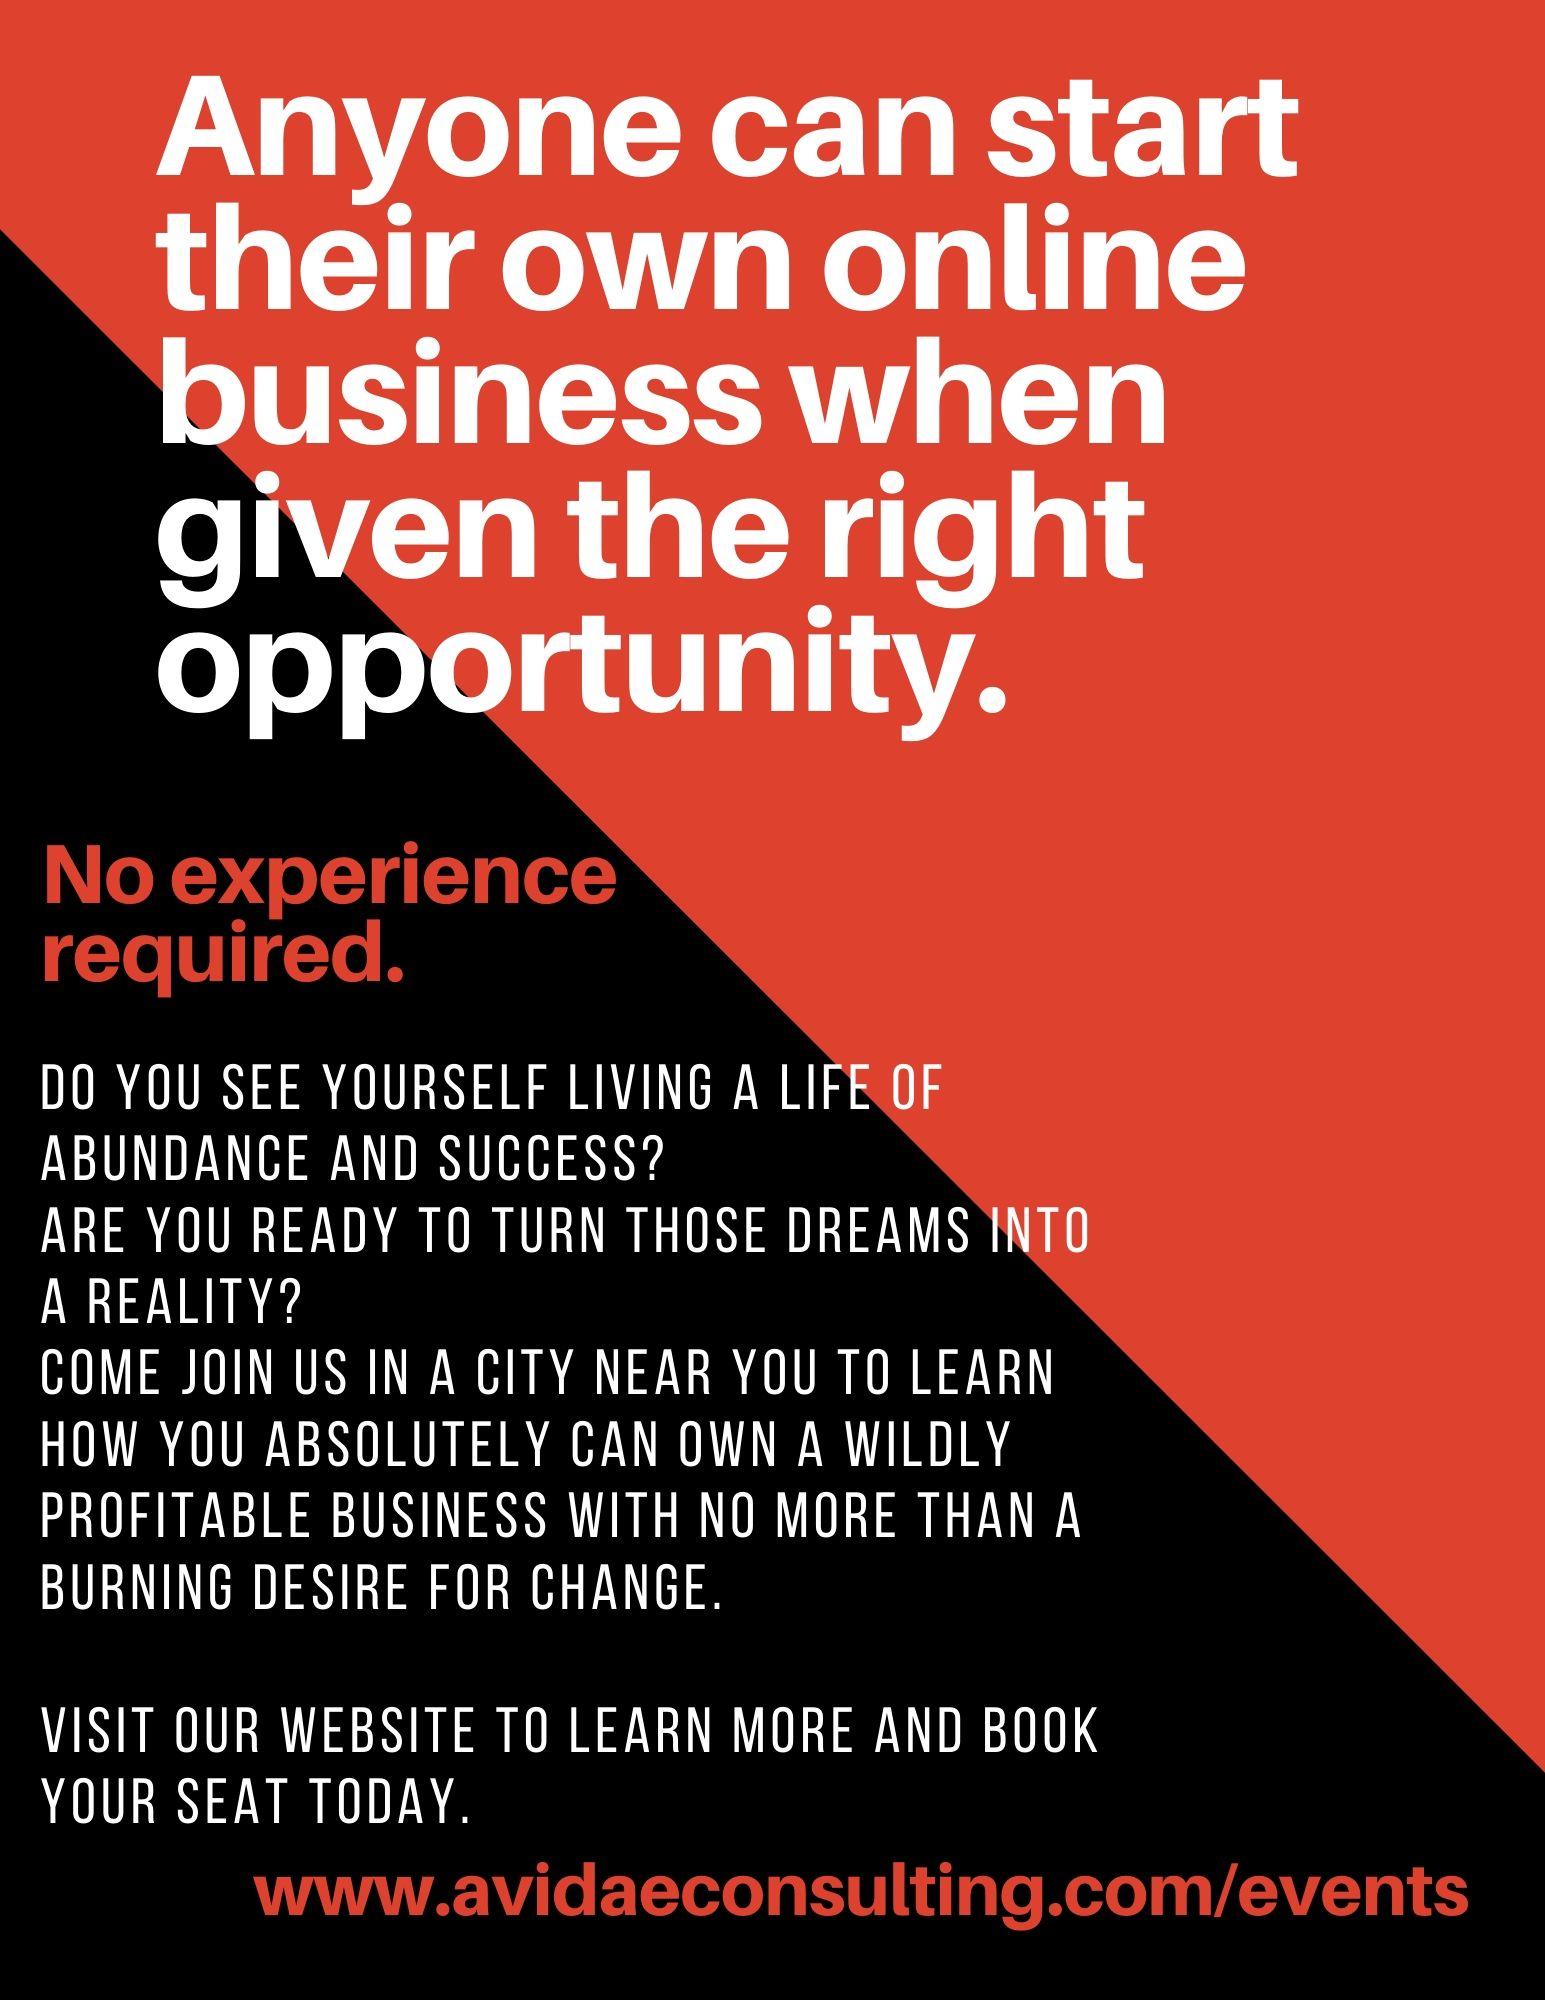 FREE! Learn how anyone, yes! even you, can start an online business.